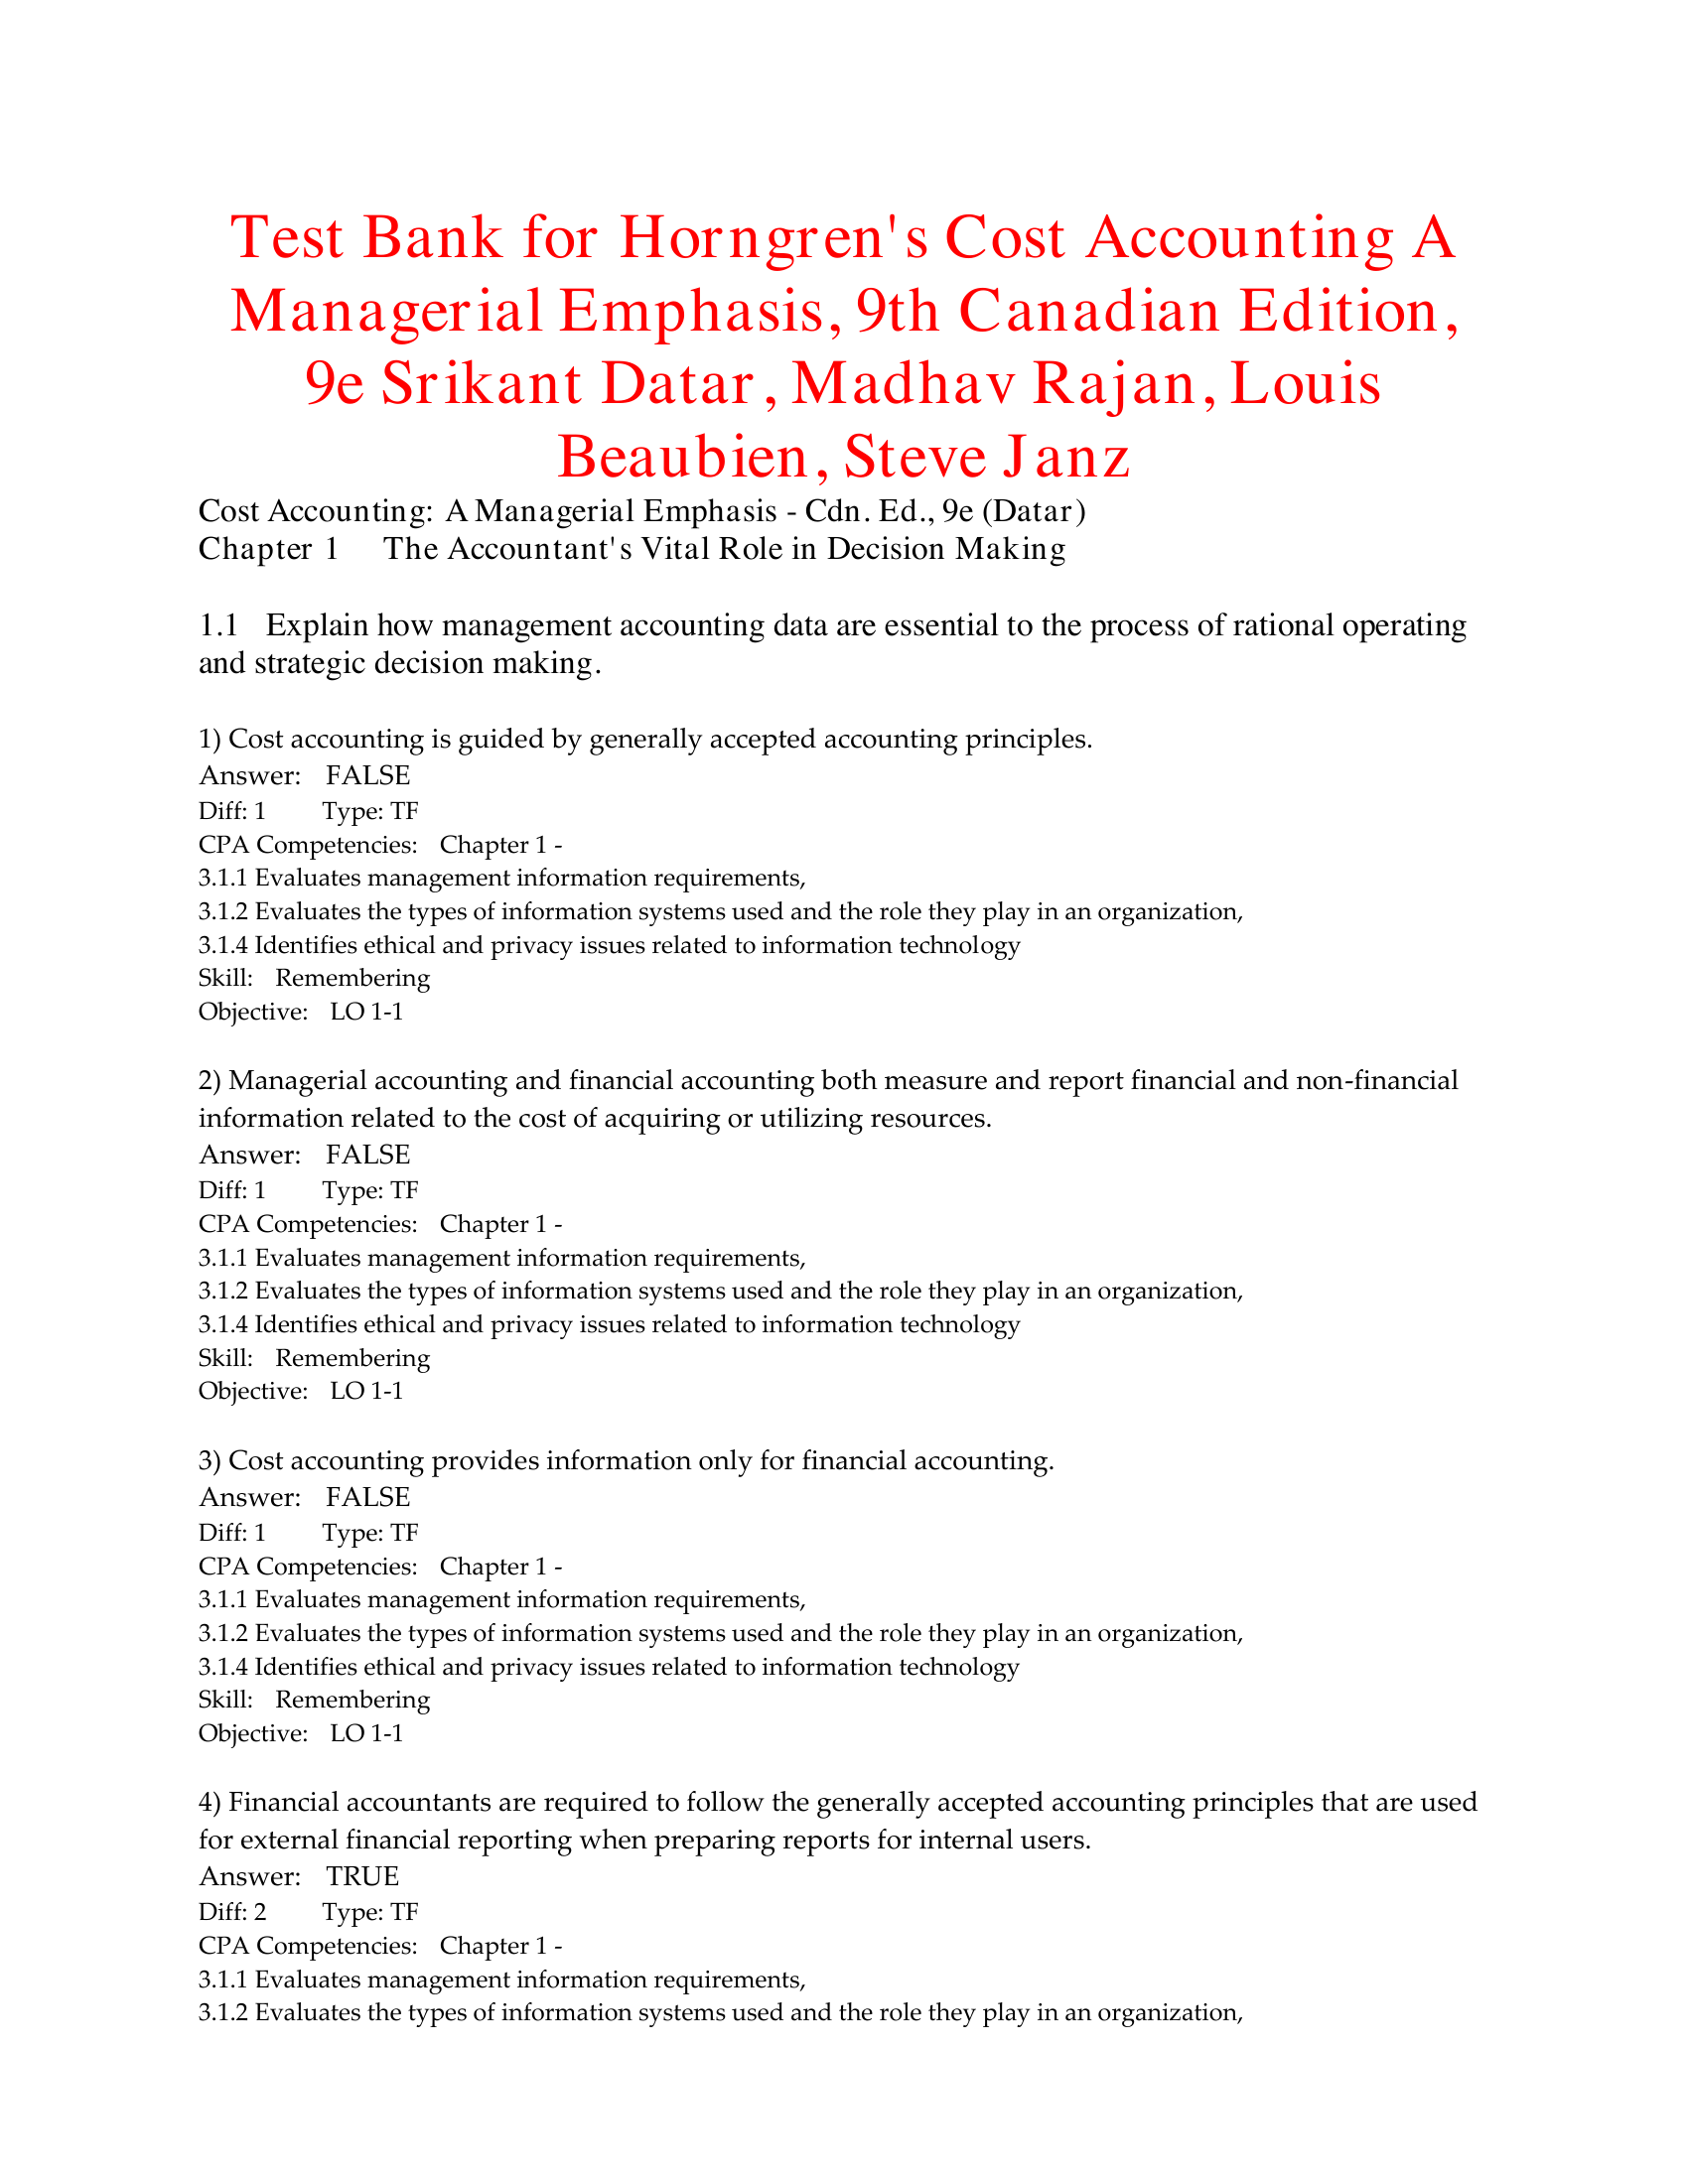 Horngren's Cost Accounting A Managerial Emphasis, Canadian Edition